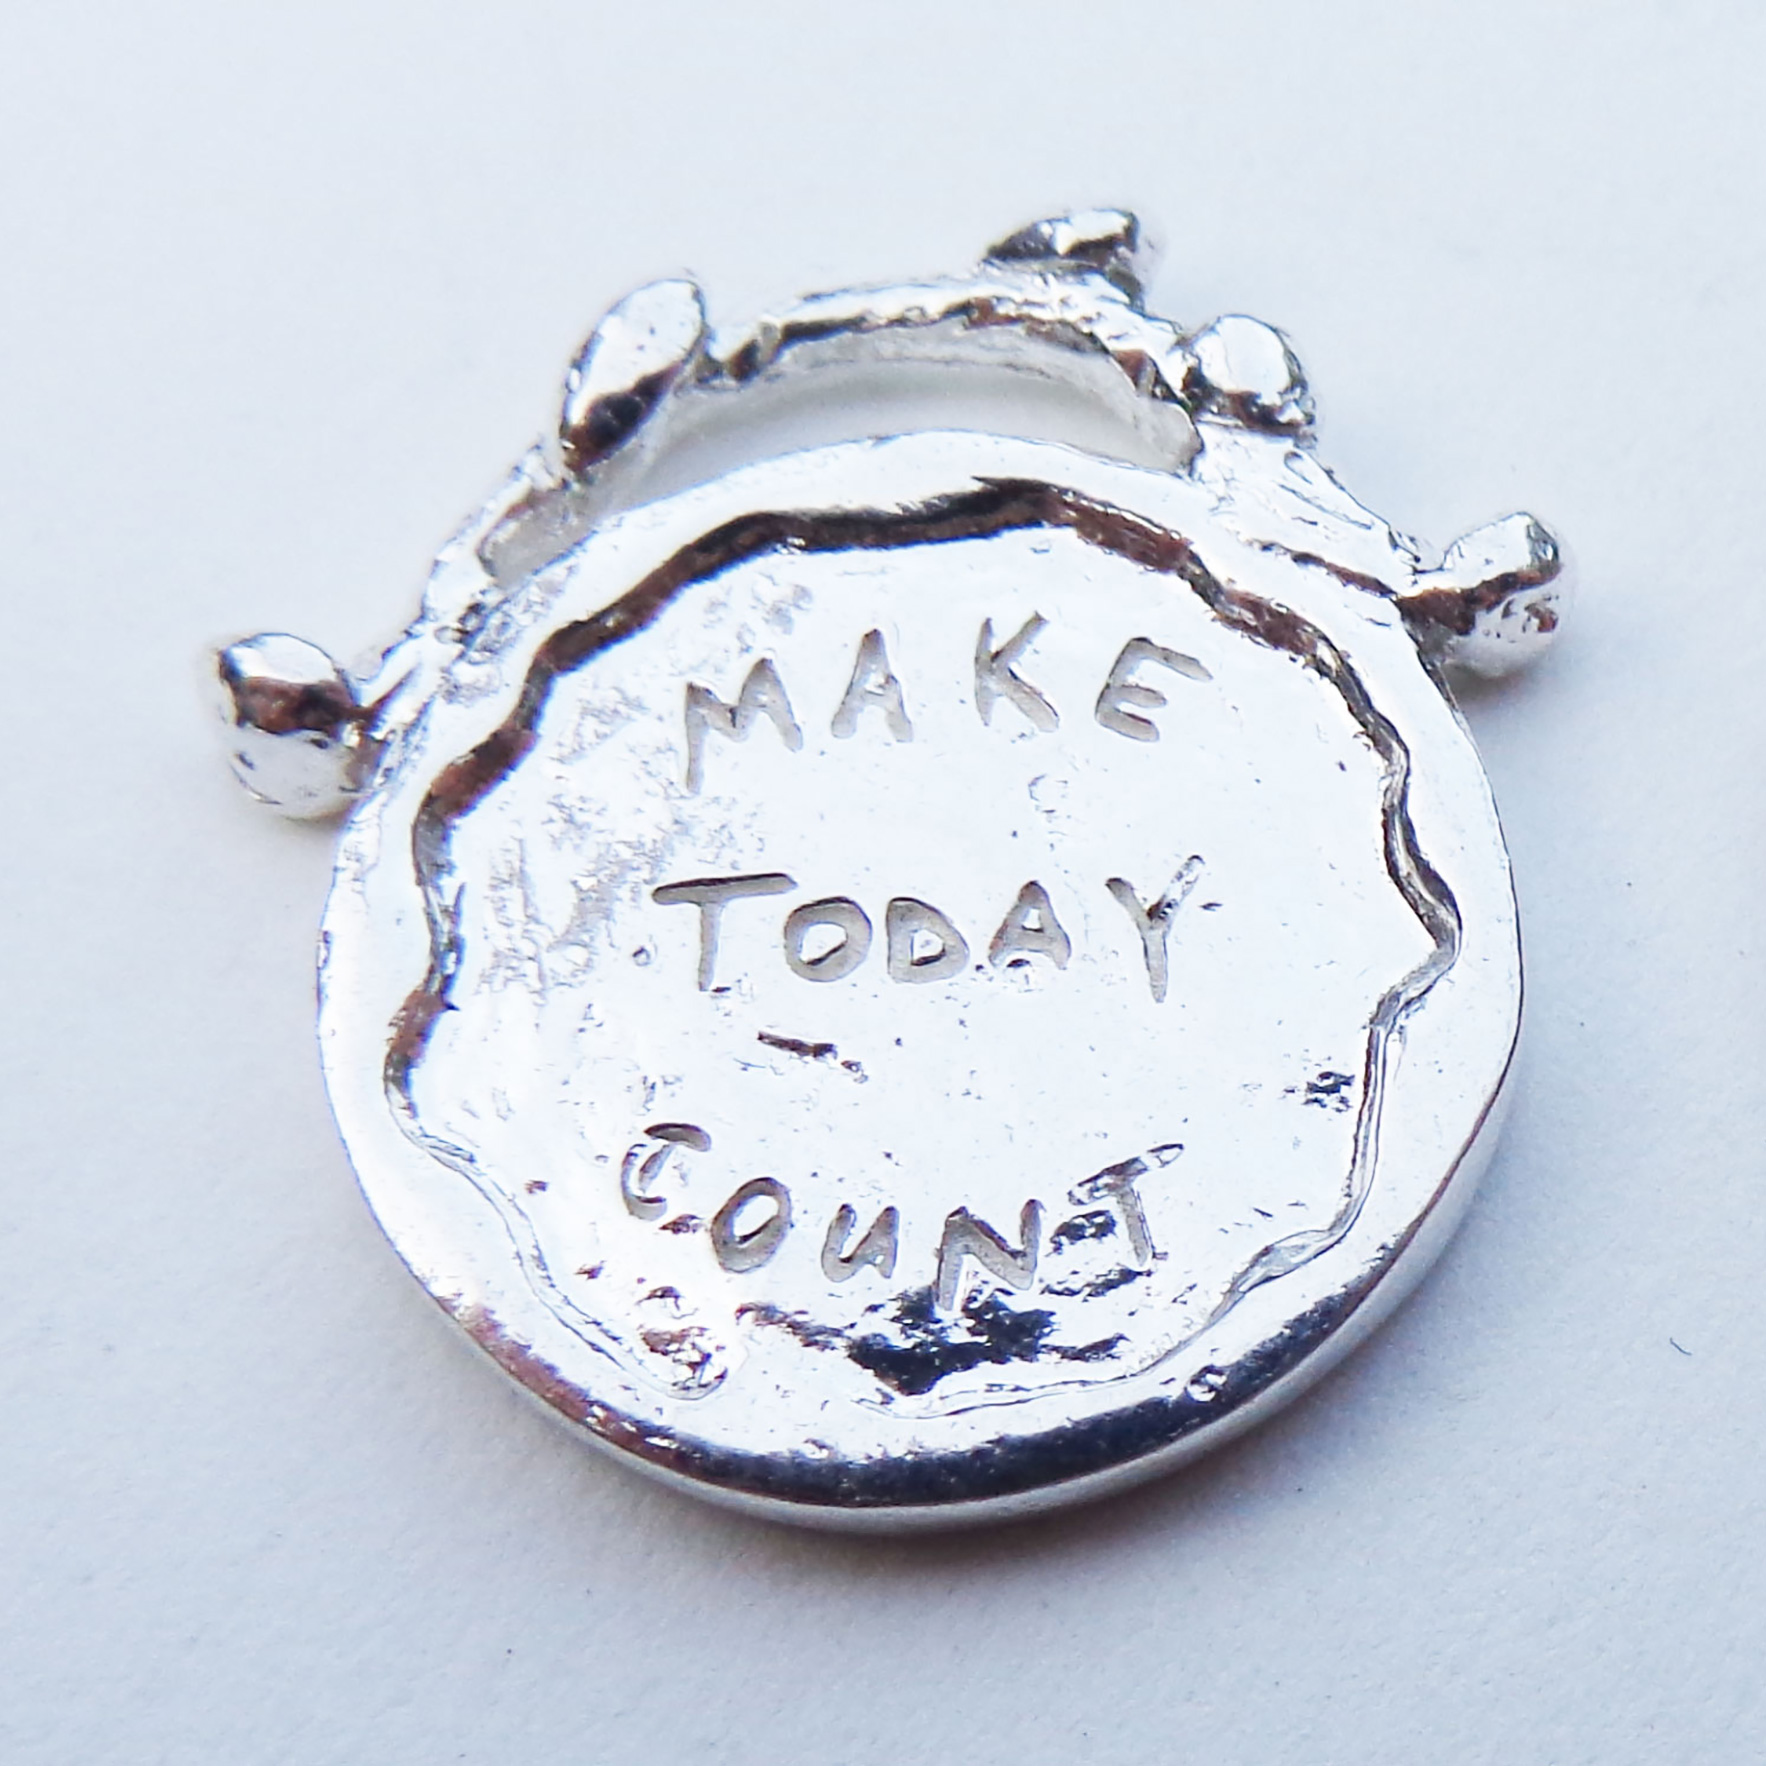 Make Today Count - Silver Necklace